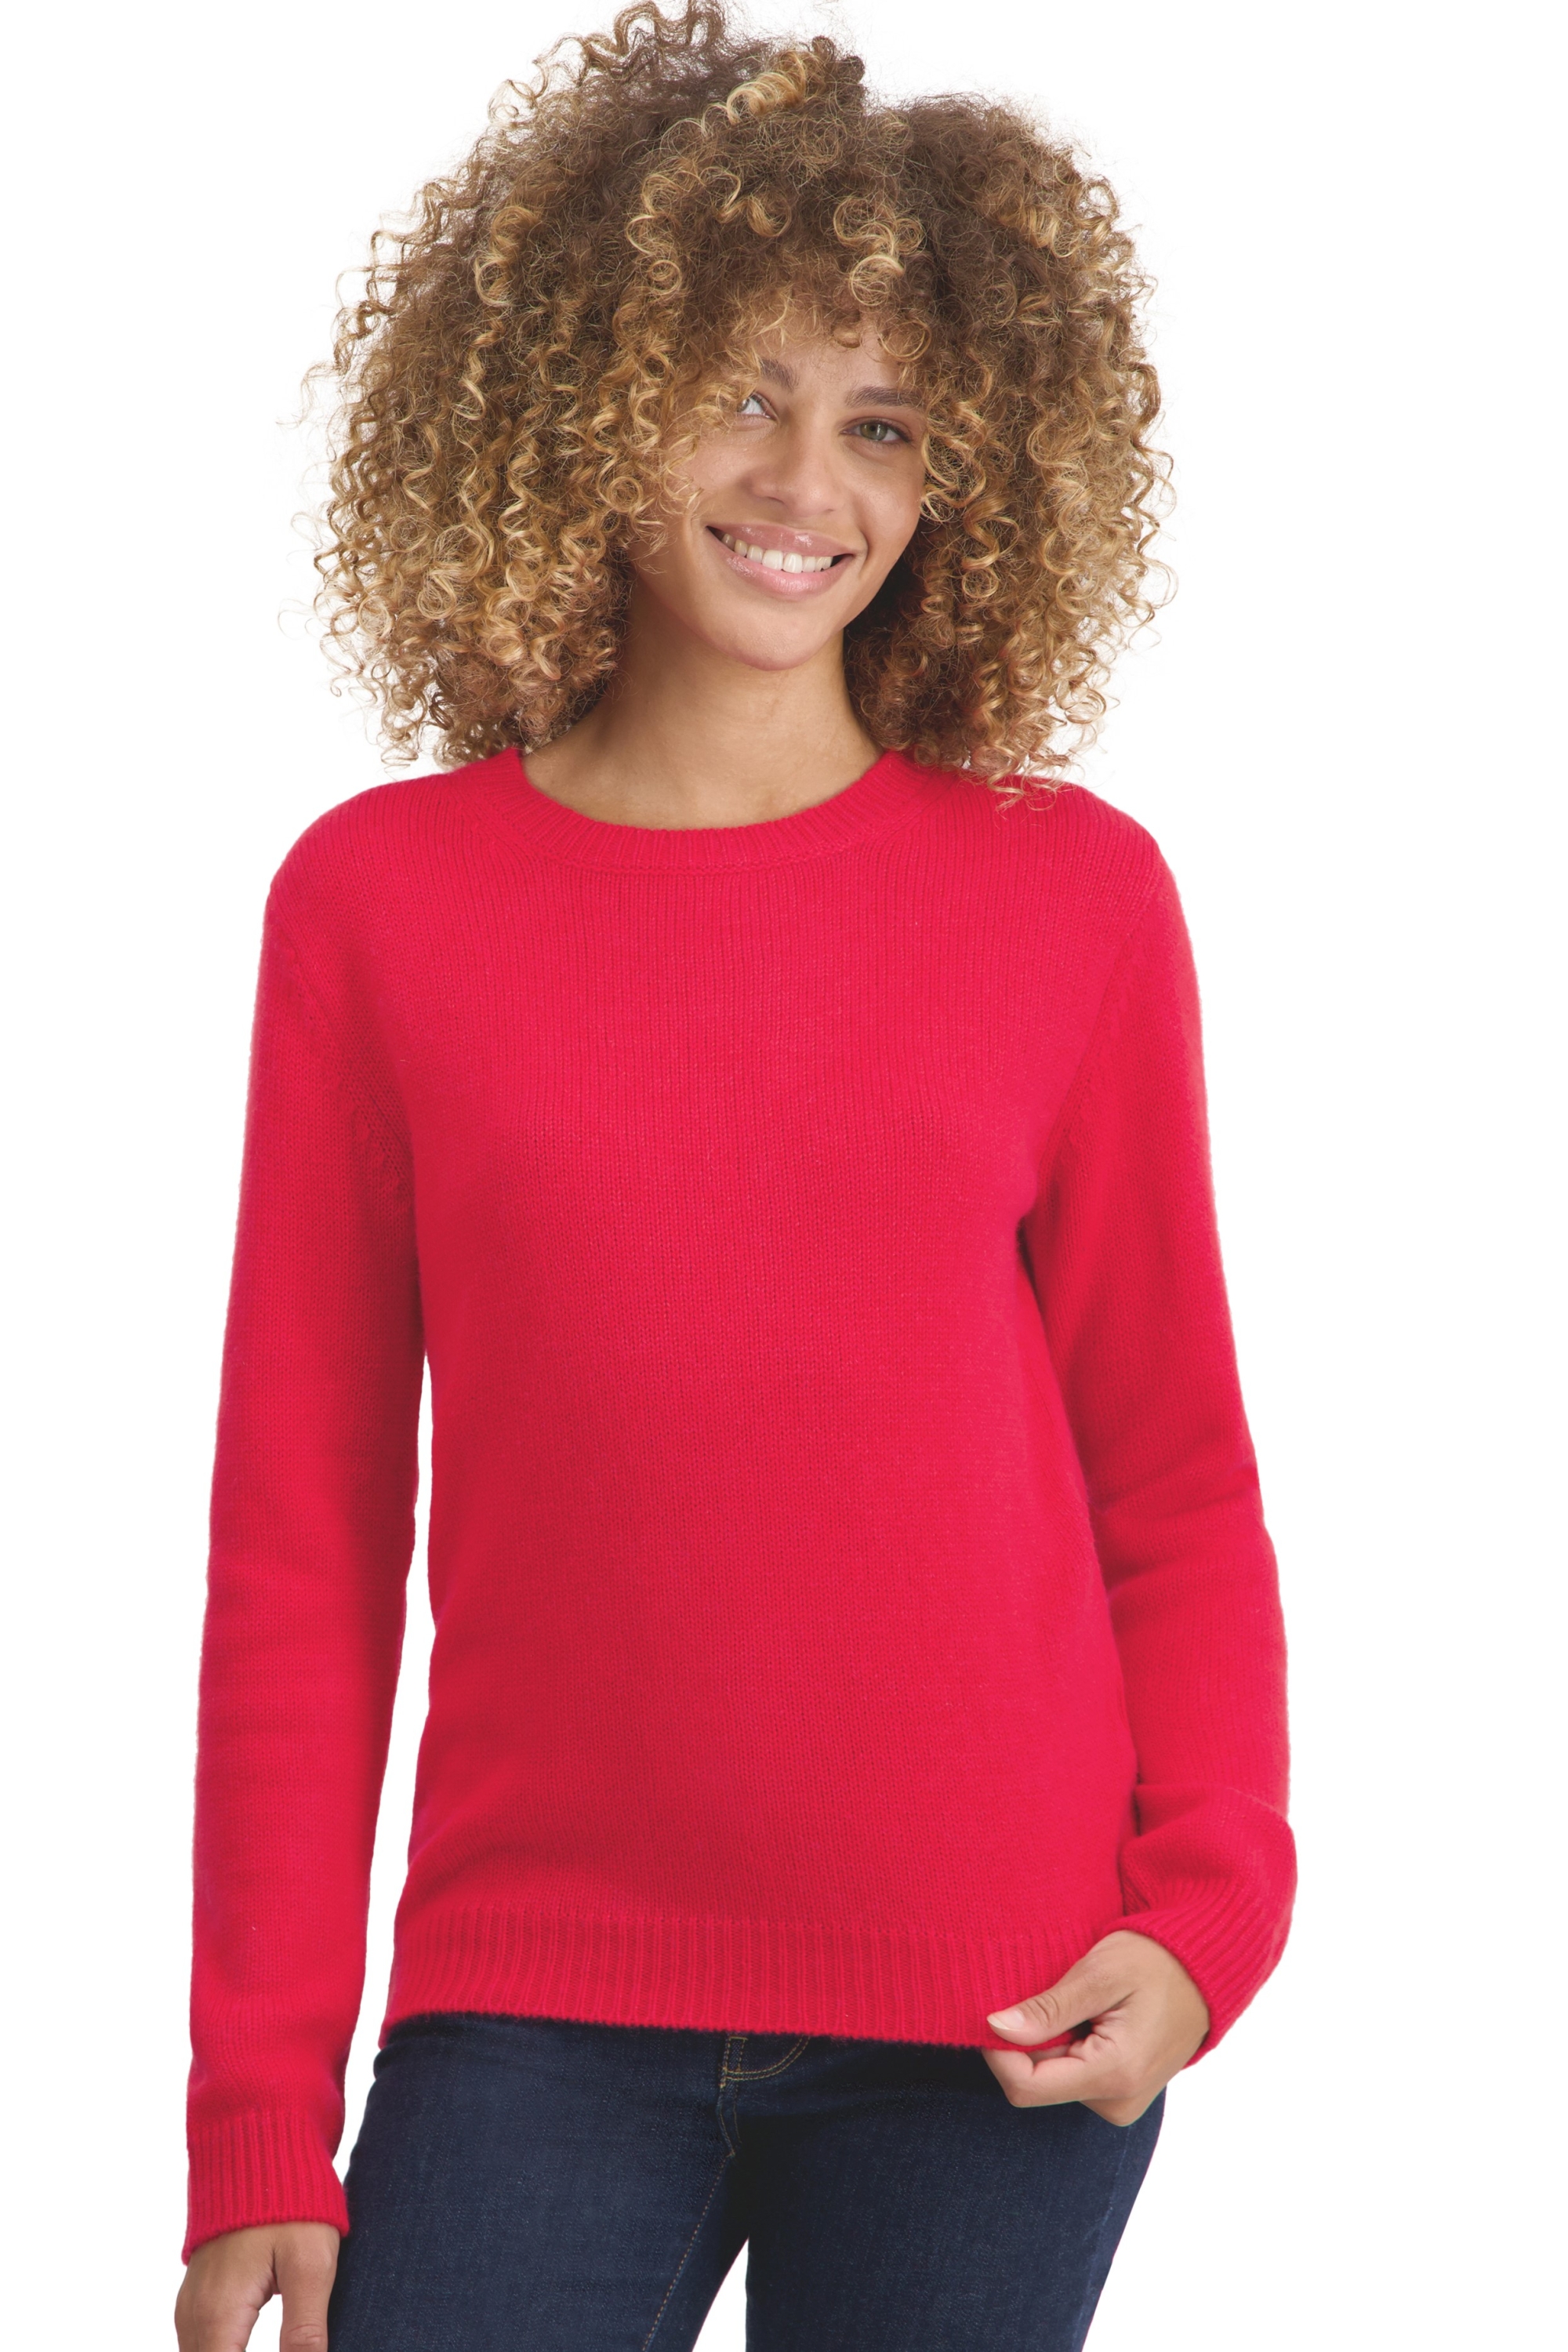 Cachemire pull femme tyrol rouge 3xl